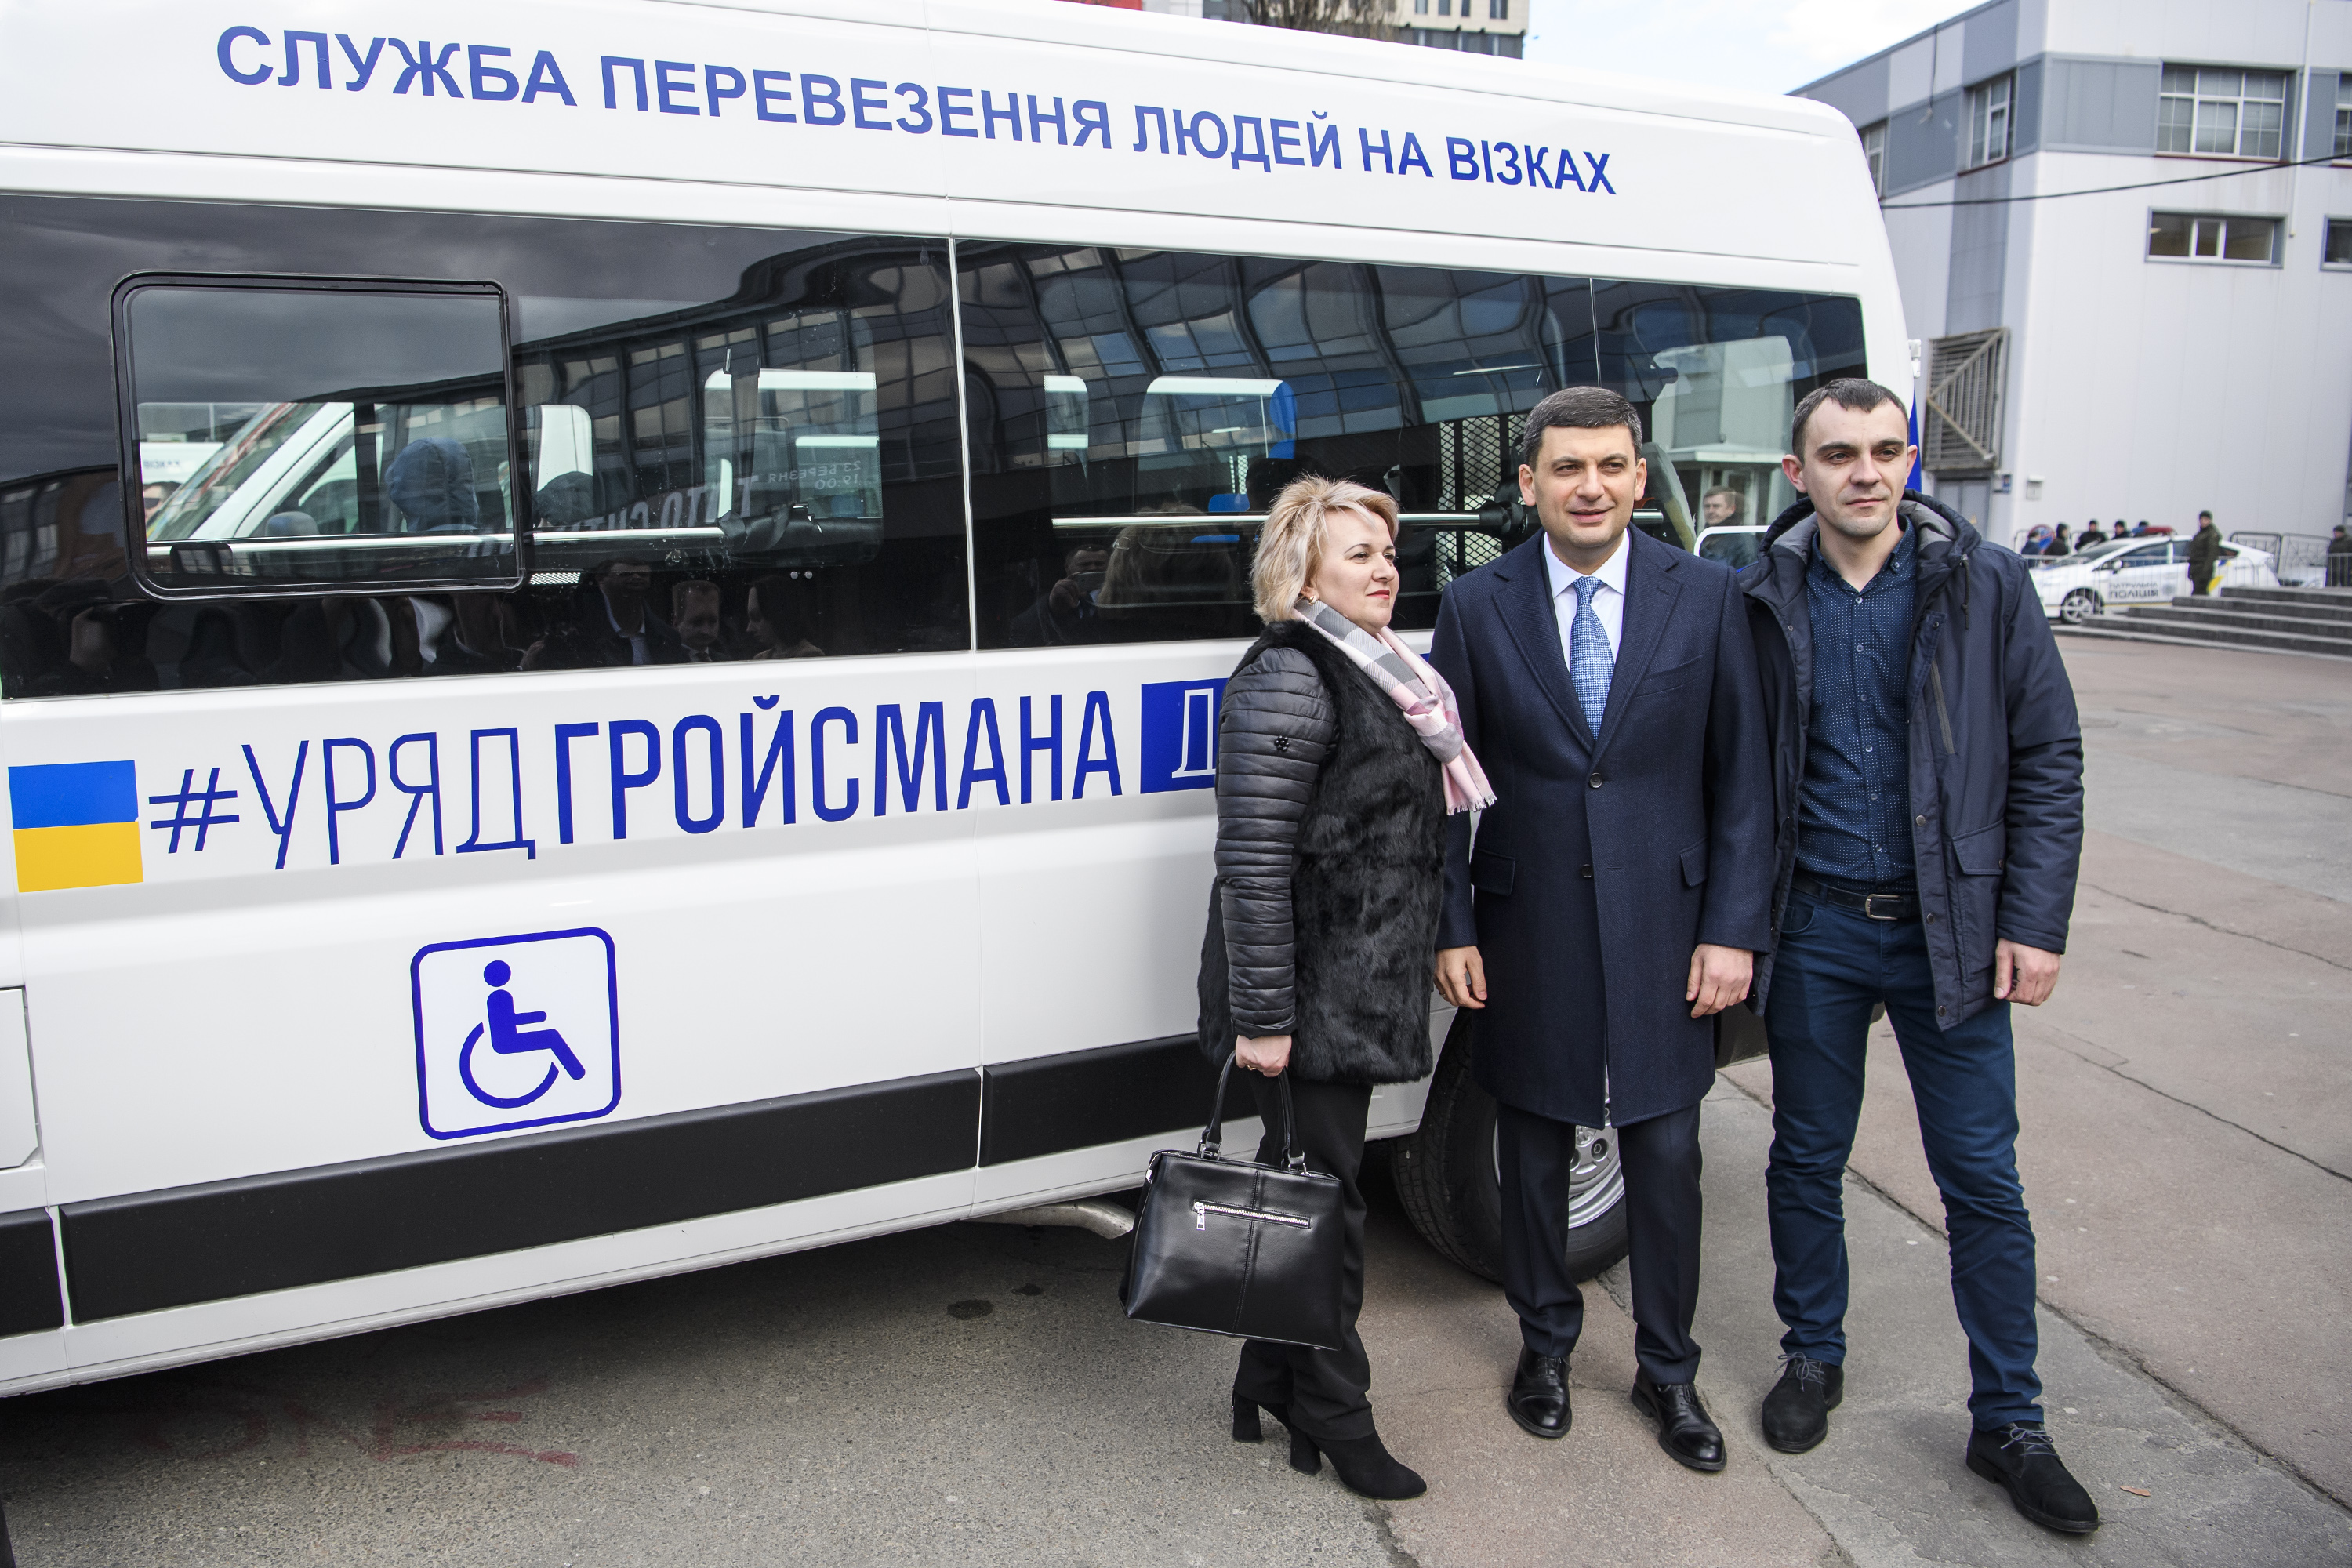 15 hromadas received special vehicles to serve physically challenged citizens